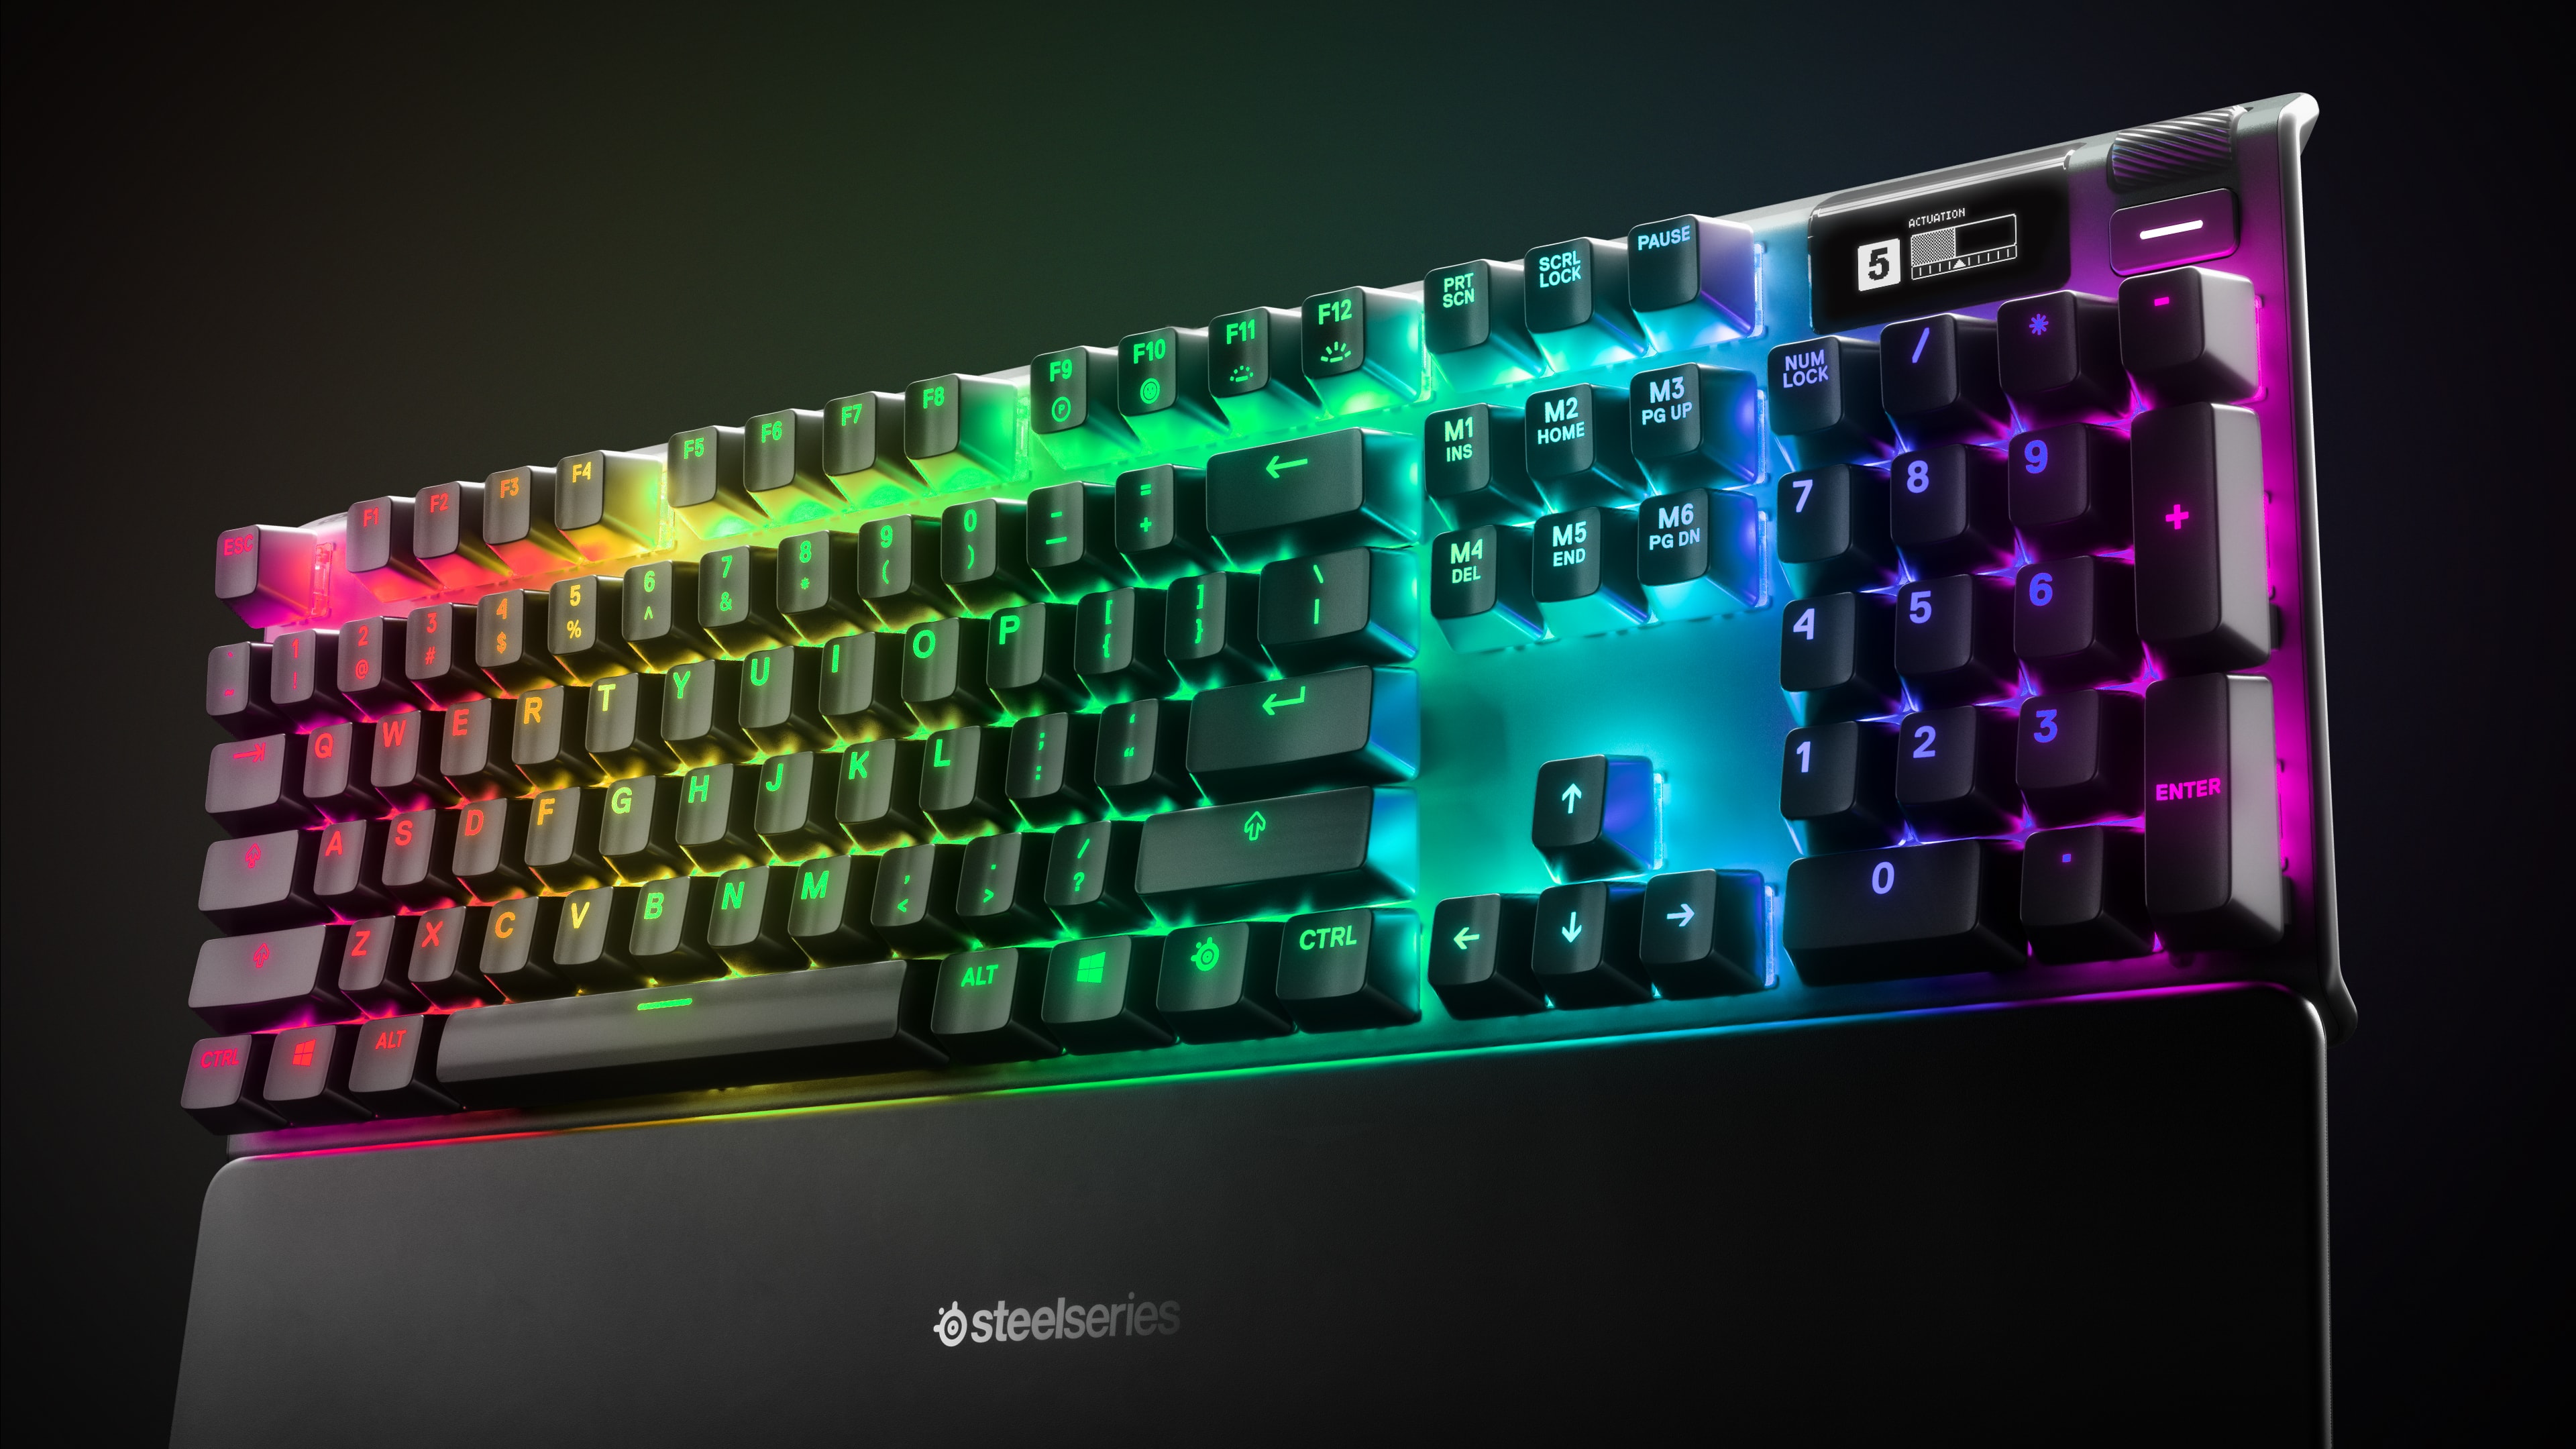 SteelSeries is taking the “Fastest Mechanical Switch” crown with their new keyboards